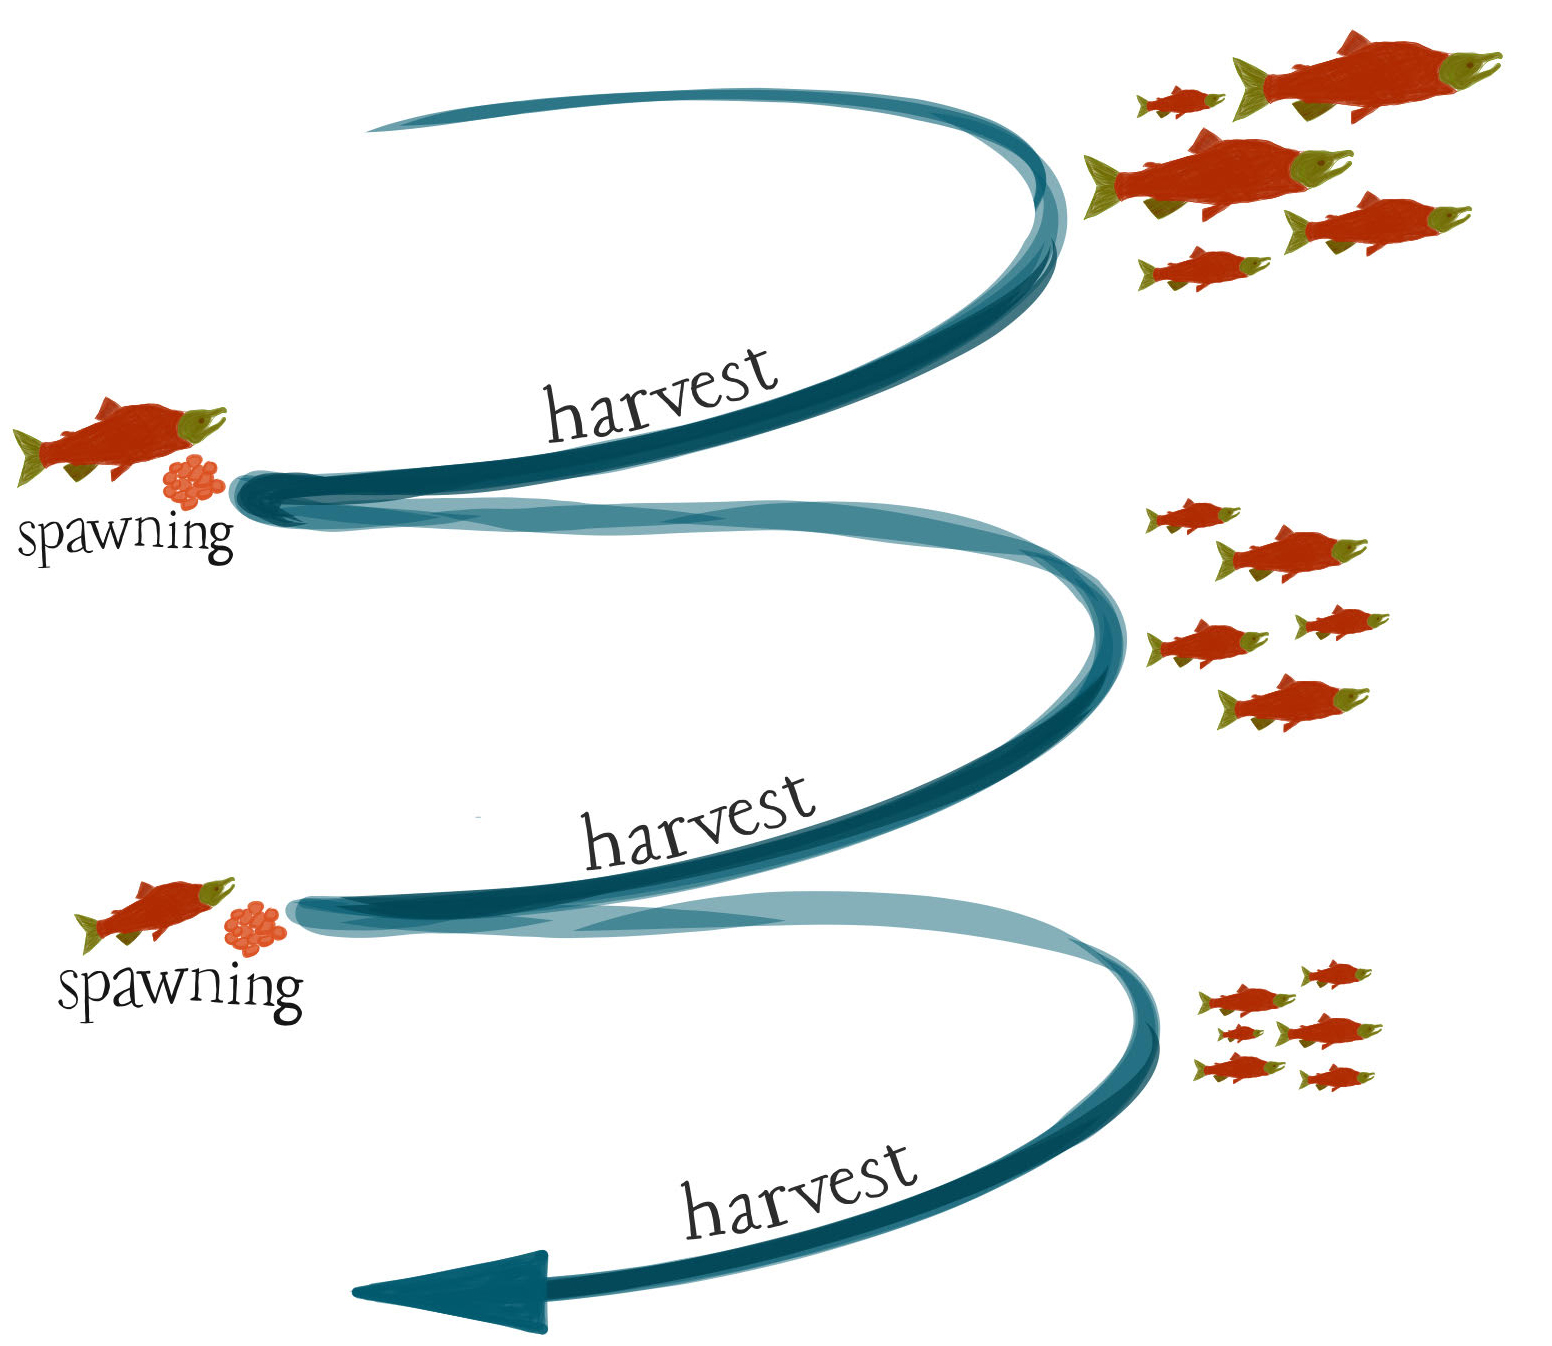 Selective harvest graphic showing spawning fish and harvested fish